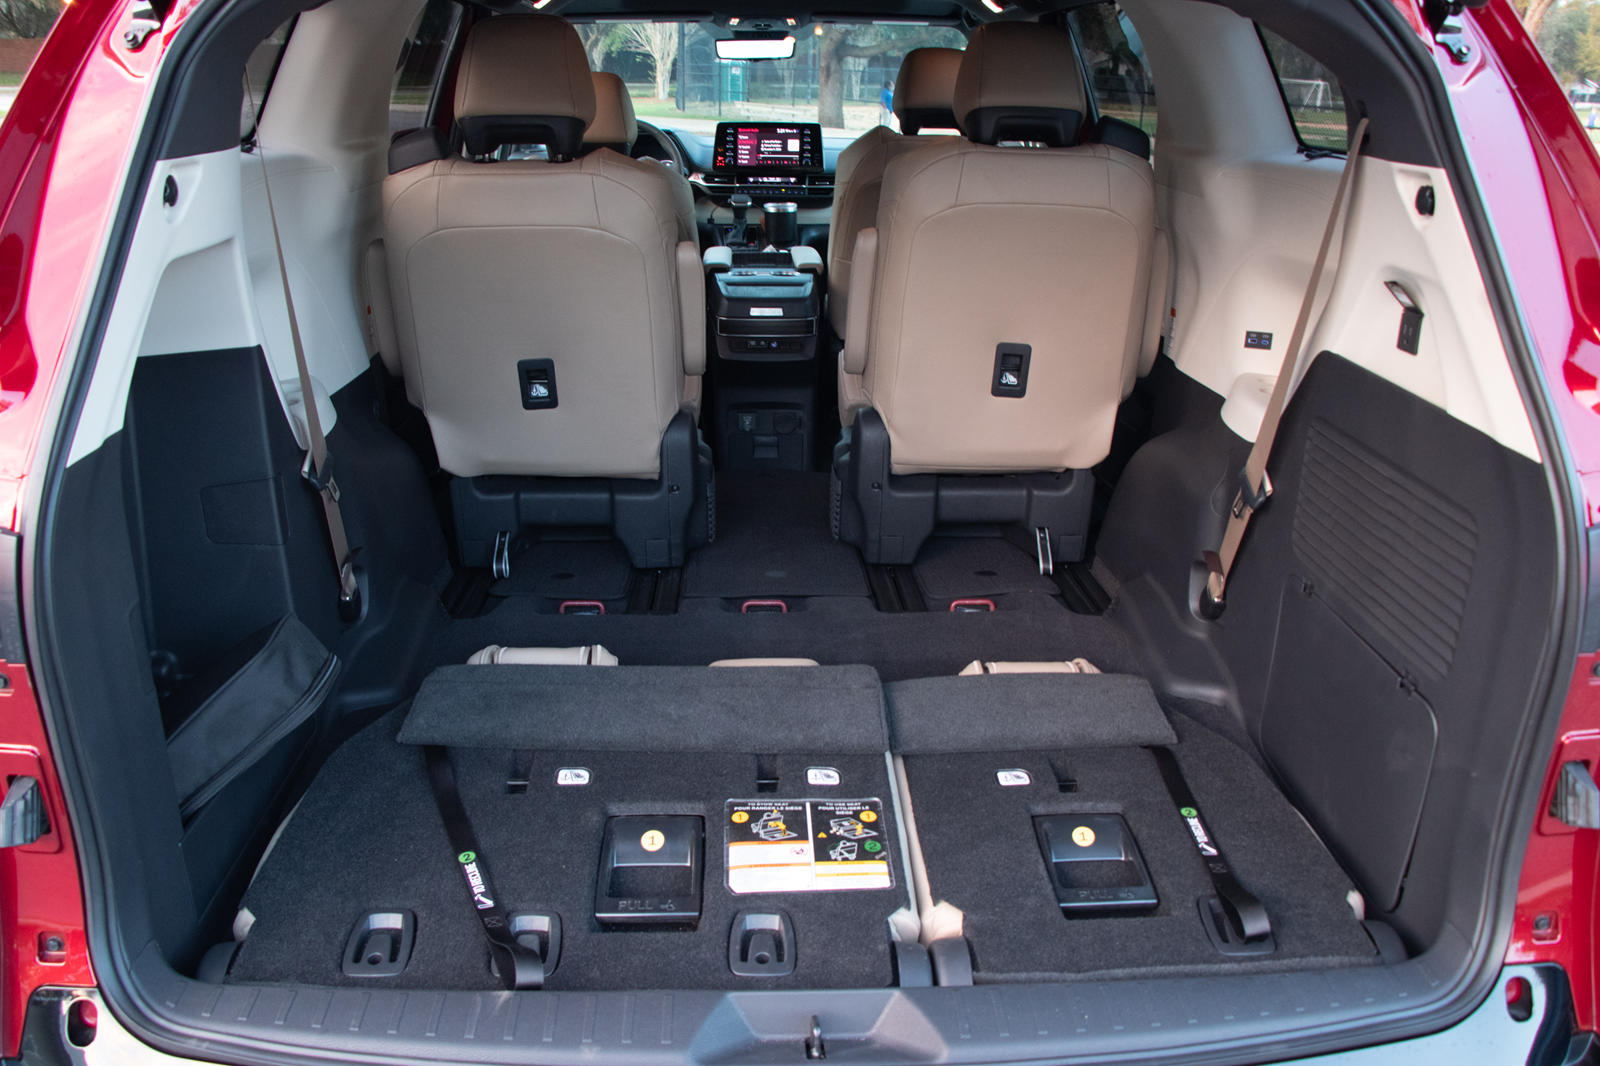 2022 Toyota Sienna Interior Dimensions Seating, Cargo Space & Trunk